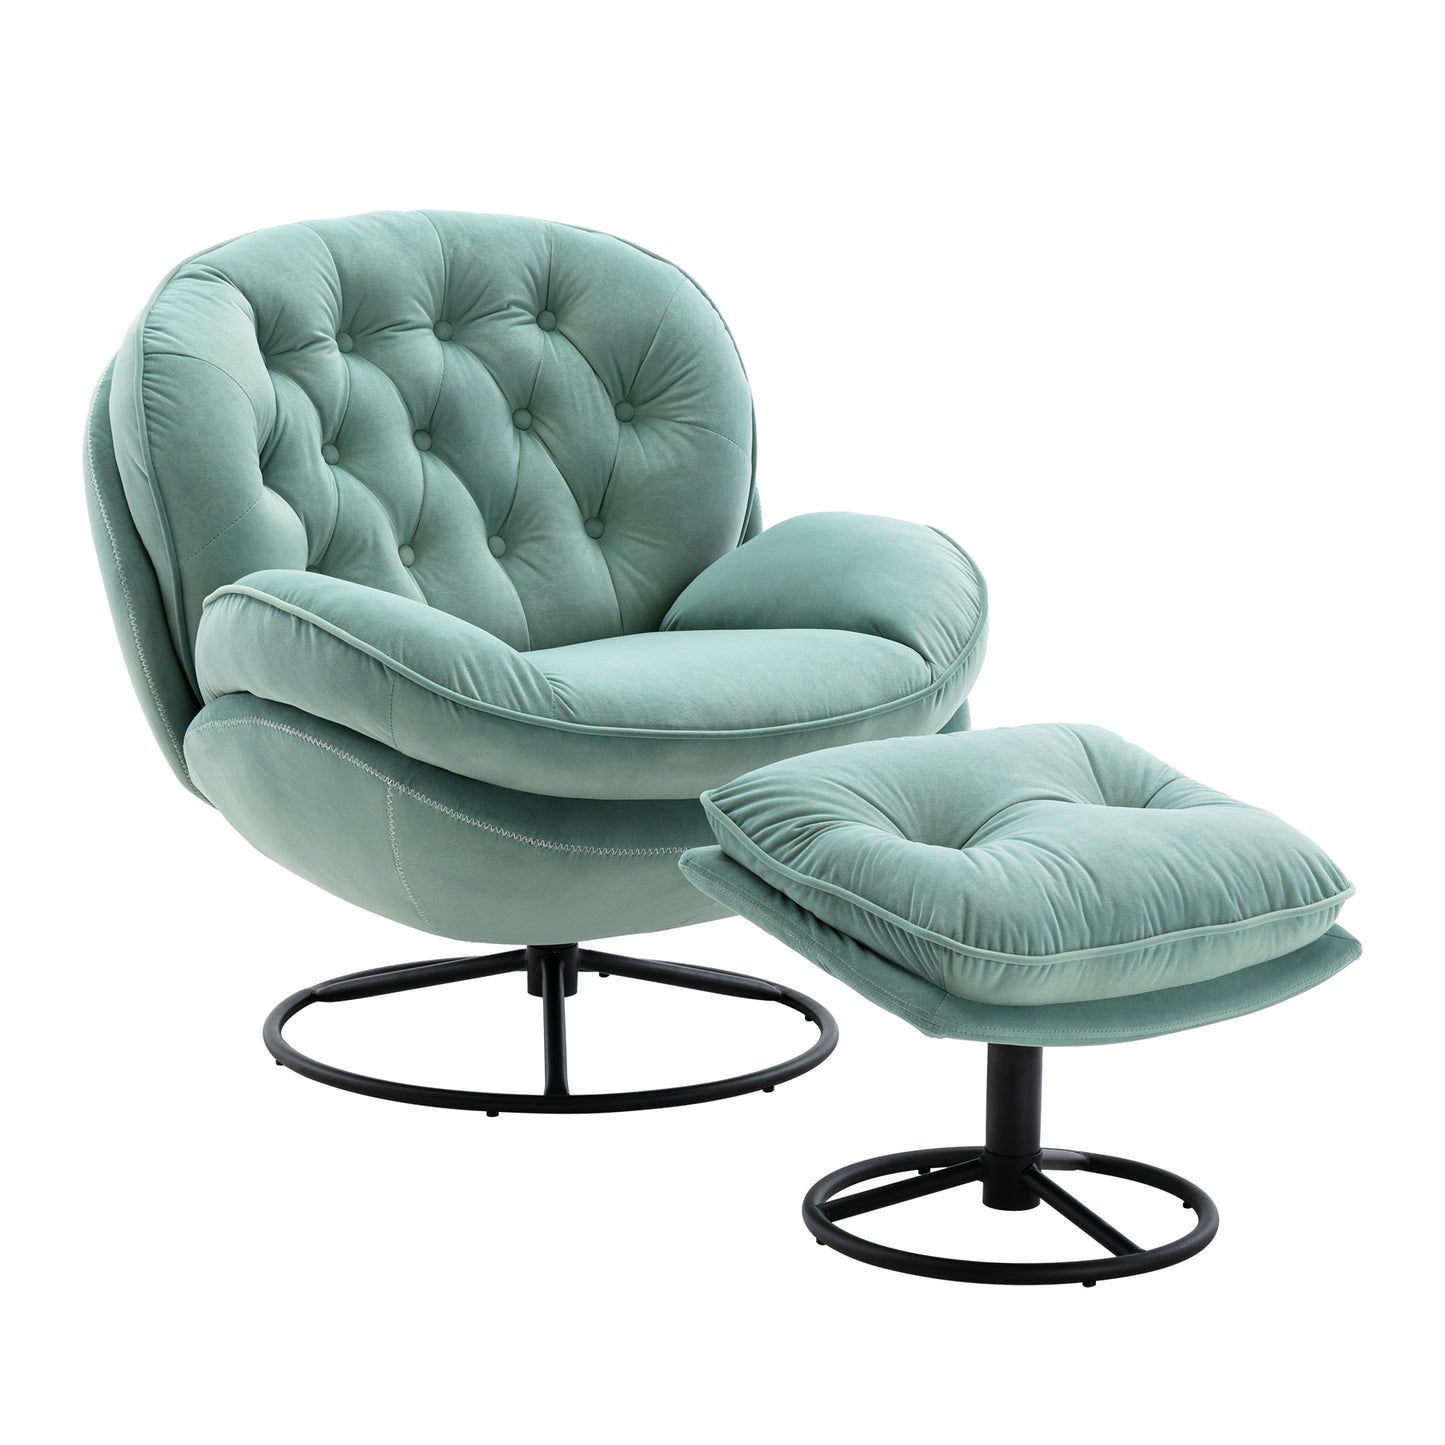 Accent chair  Living room Chair, Ottoman-TEAL